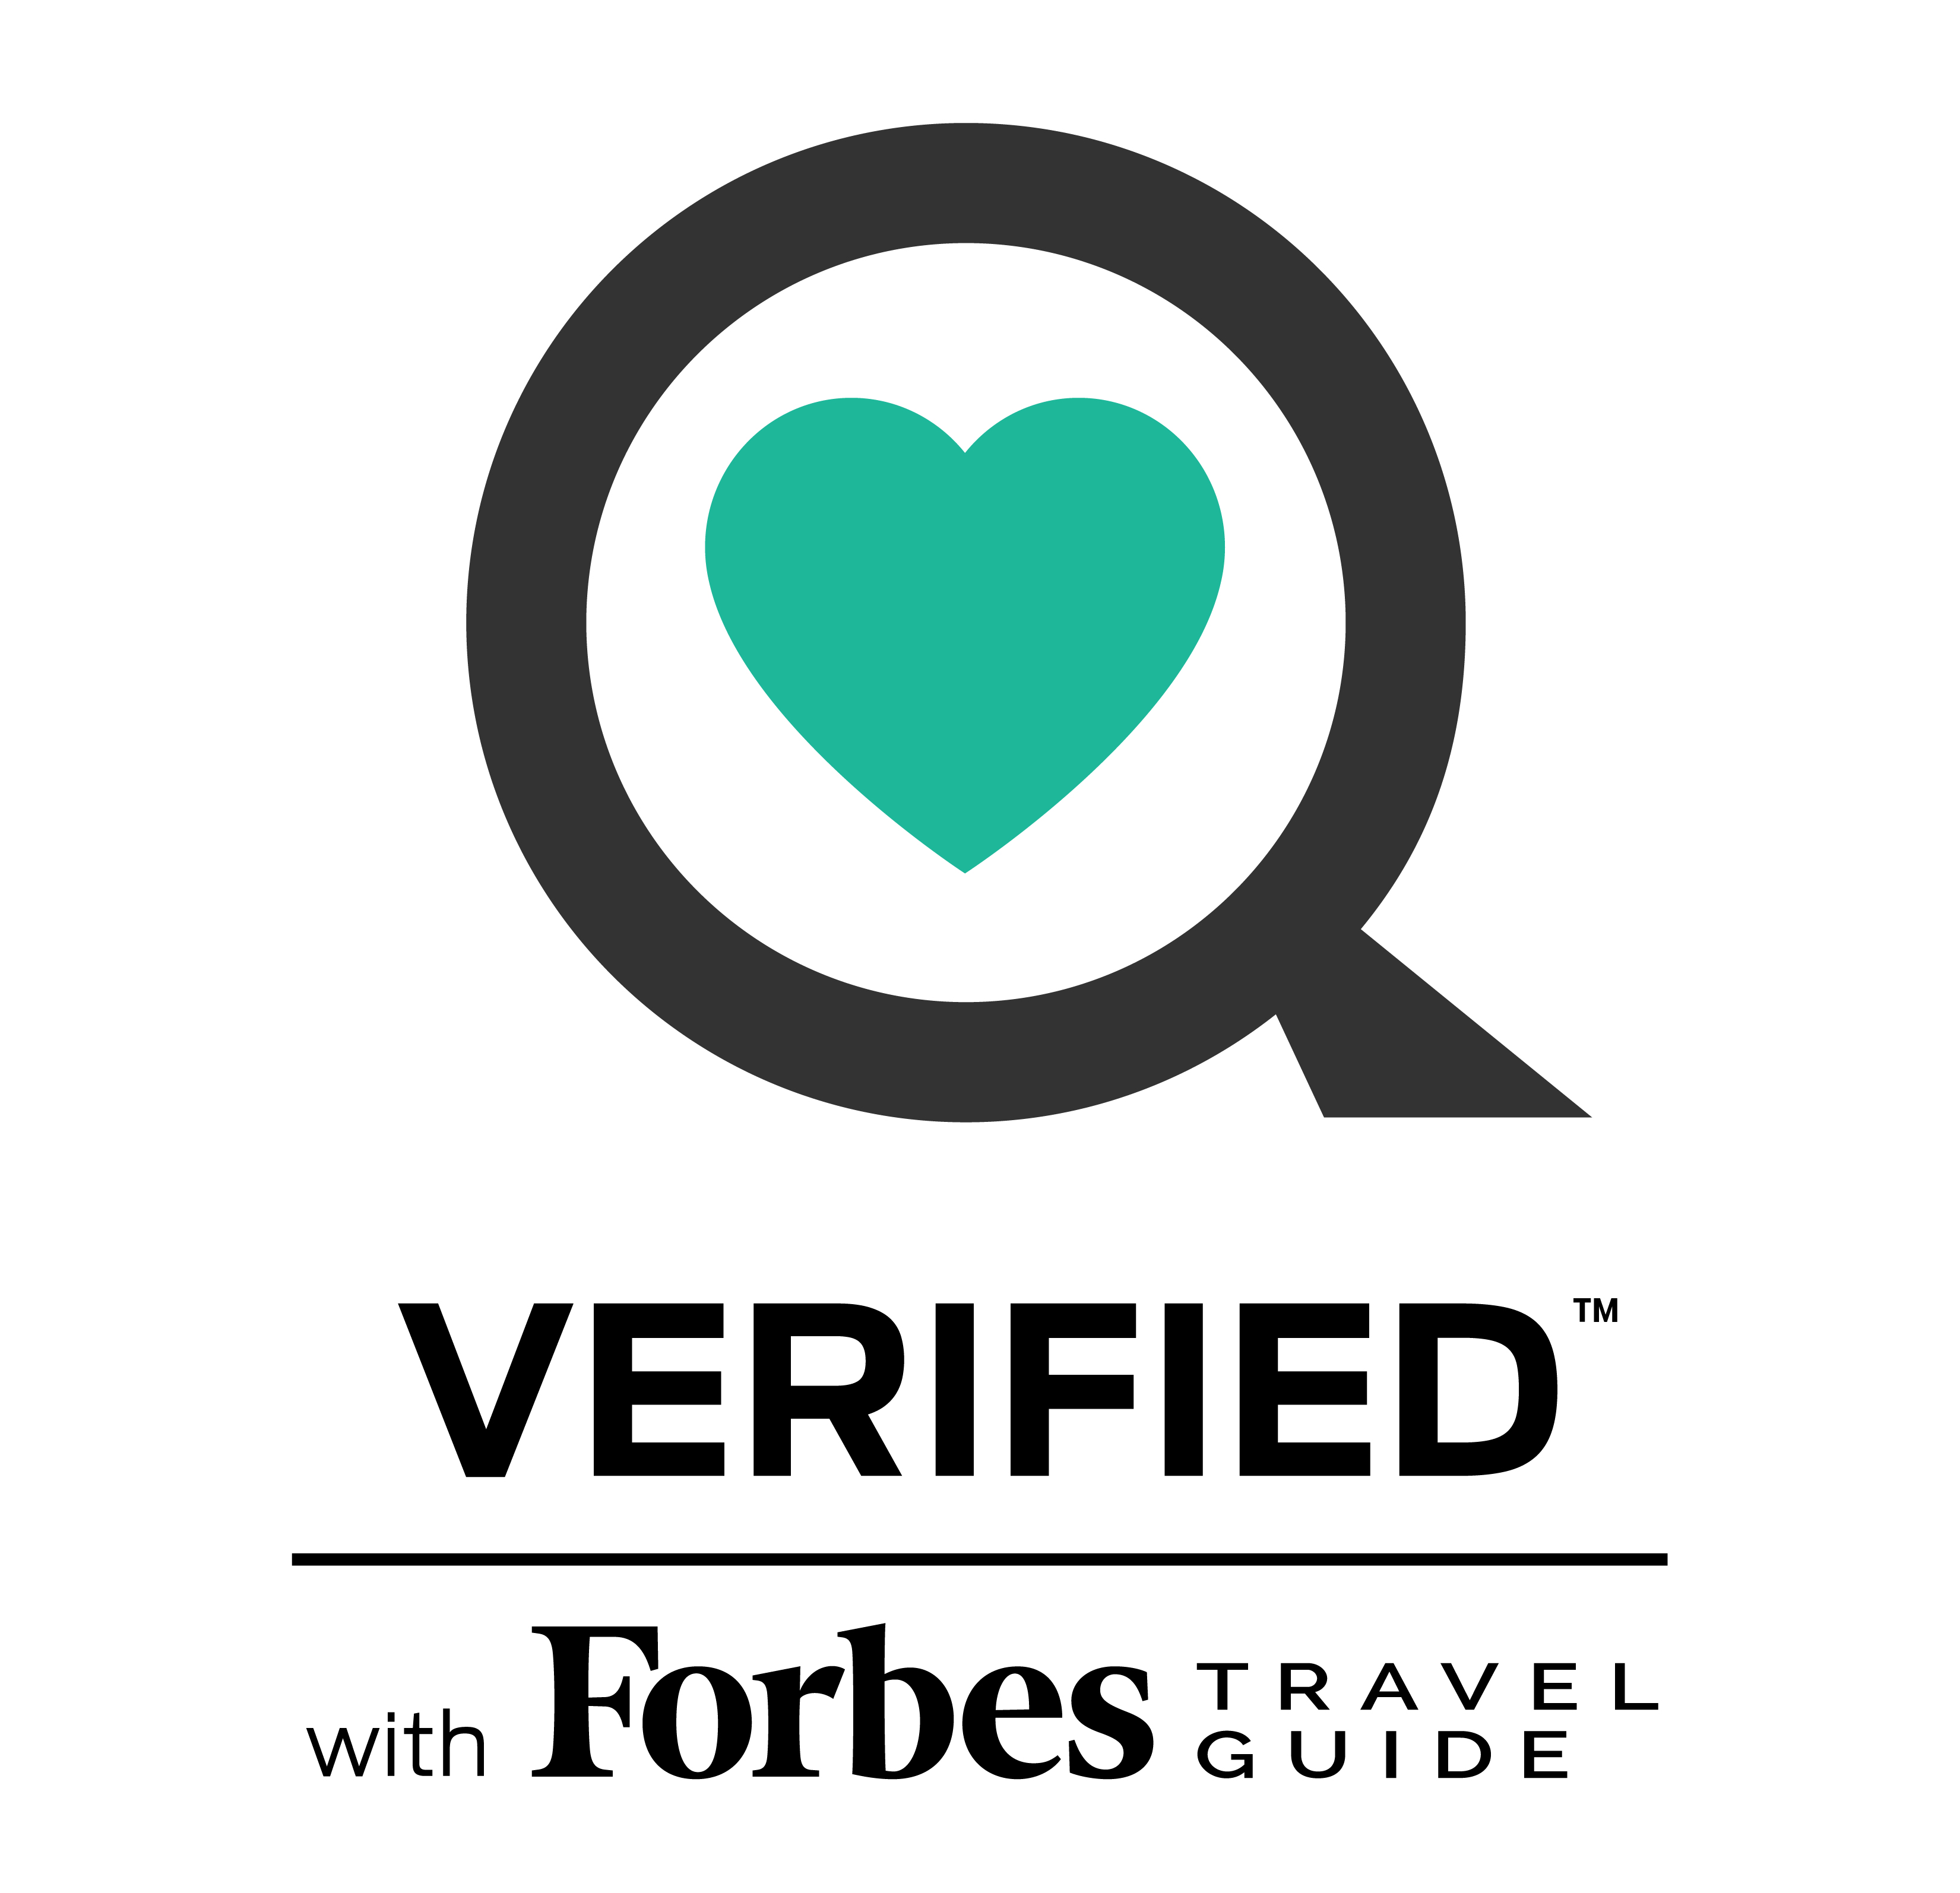 Verified with Forbes Travel Guide